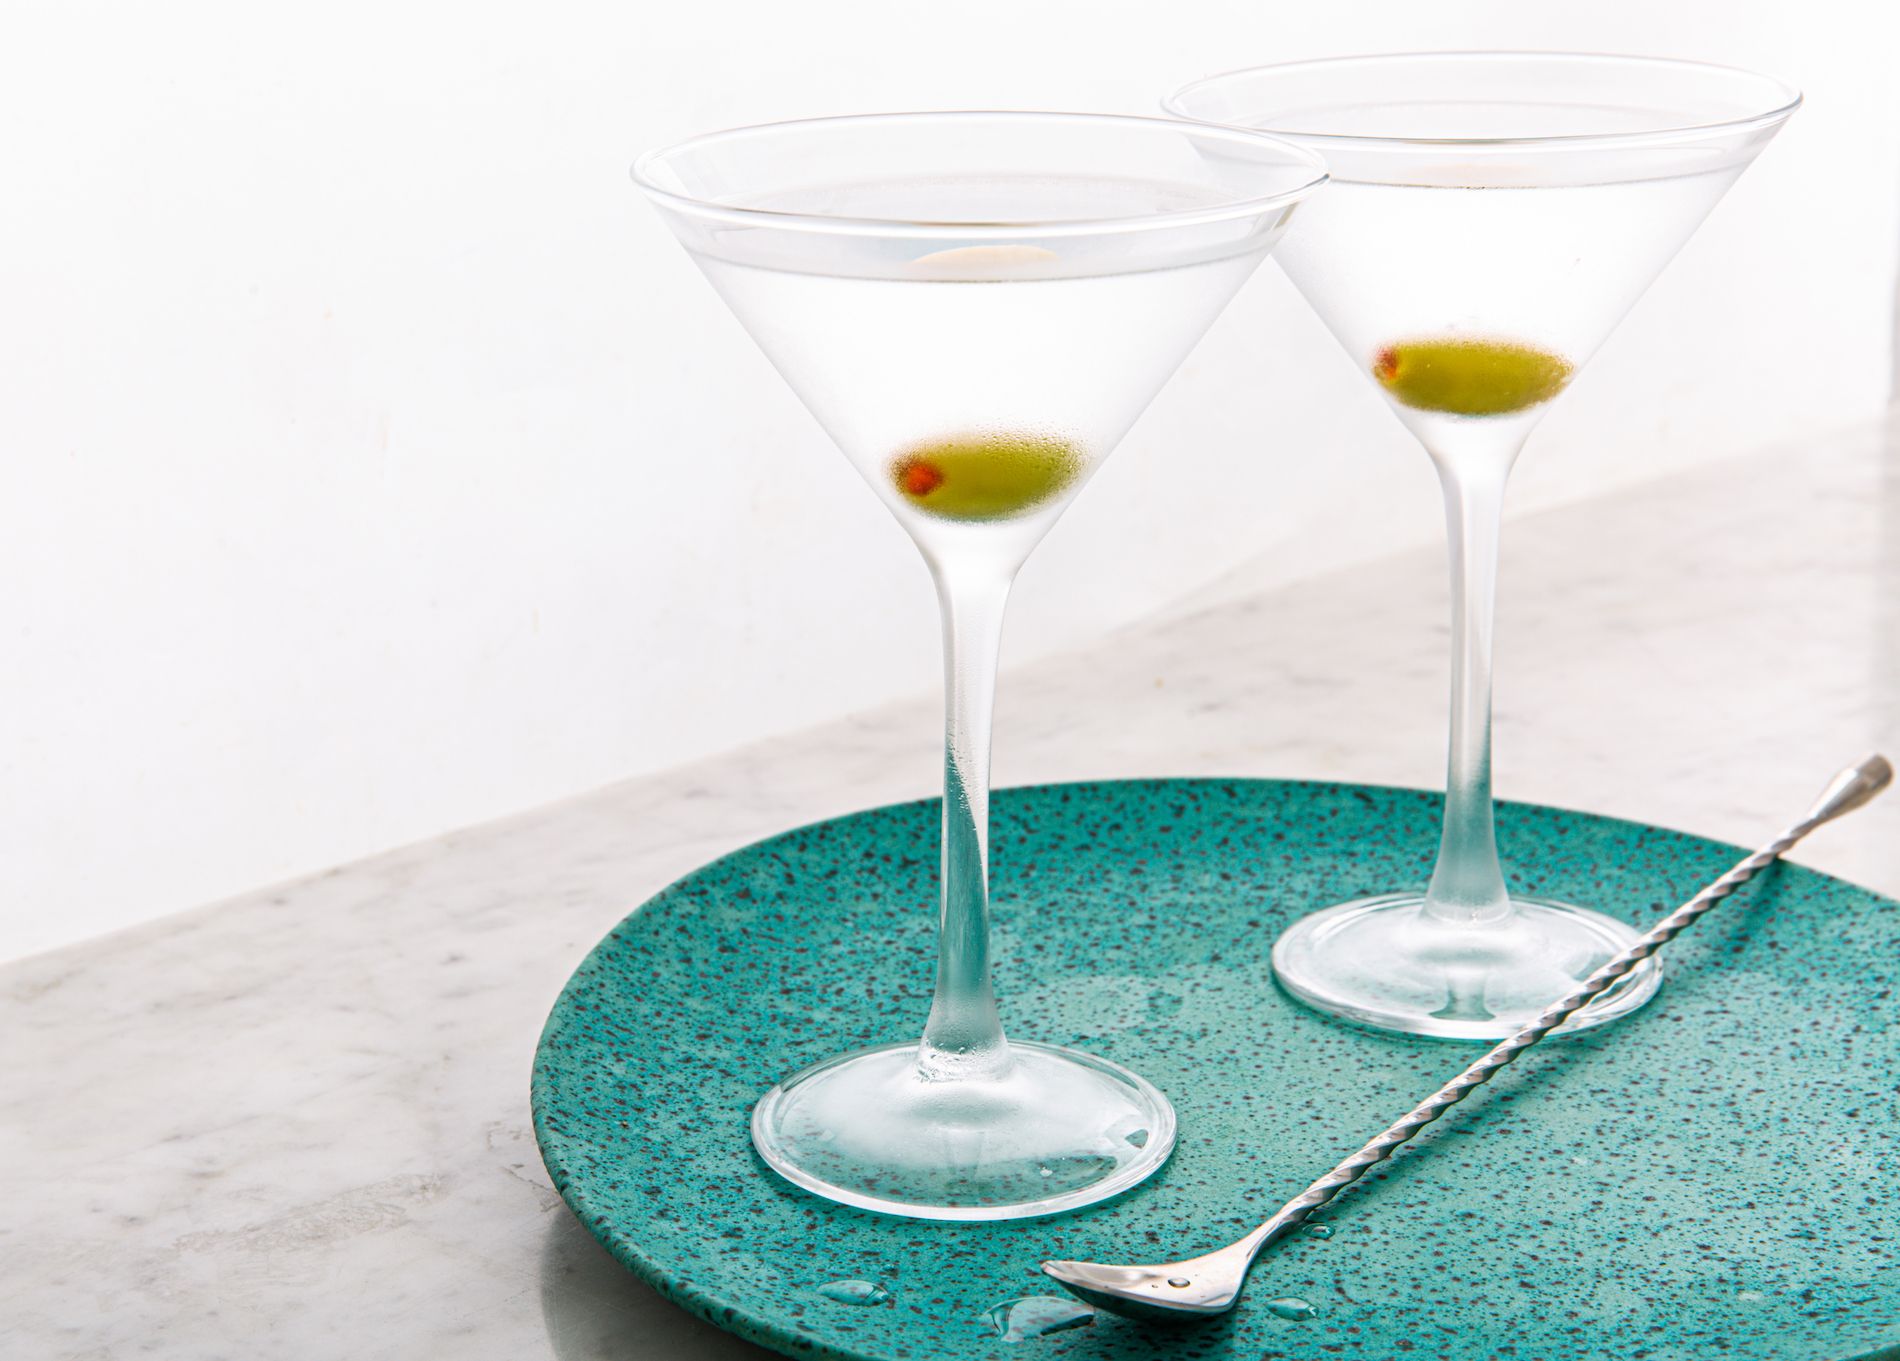 26 Martini Recipes - How To Make A Martini Cocktail With Gin or Vodka